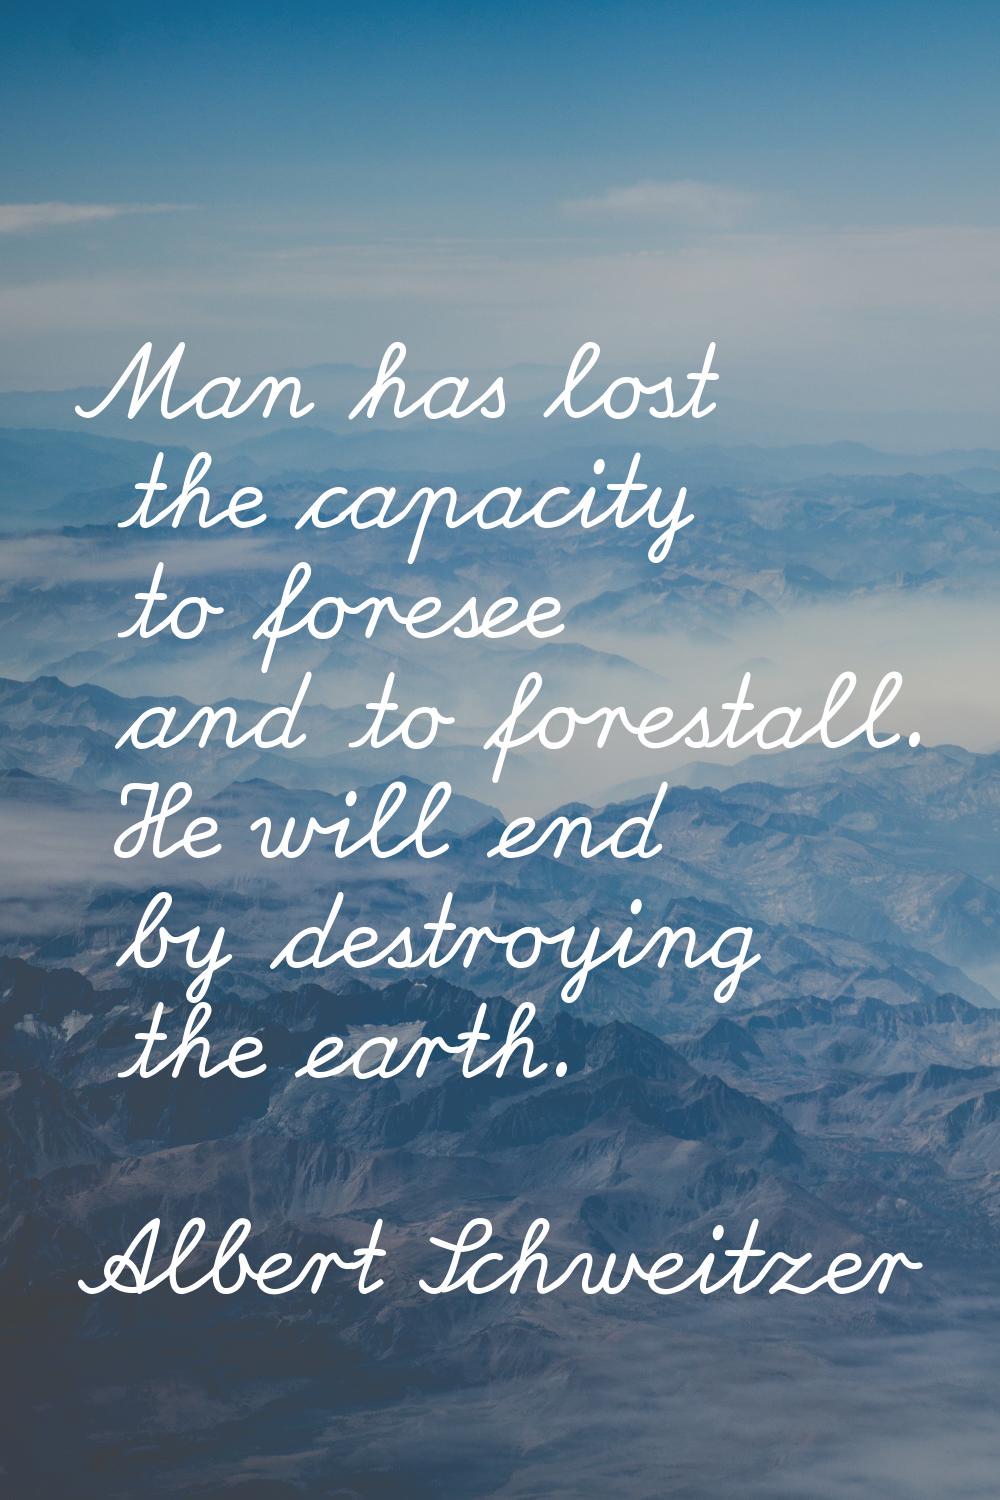 Man has lost the capacity to foresee and to forestall. He will end by destroying the earth.